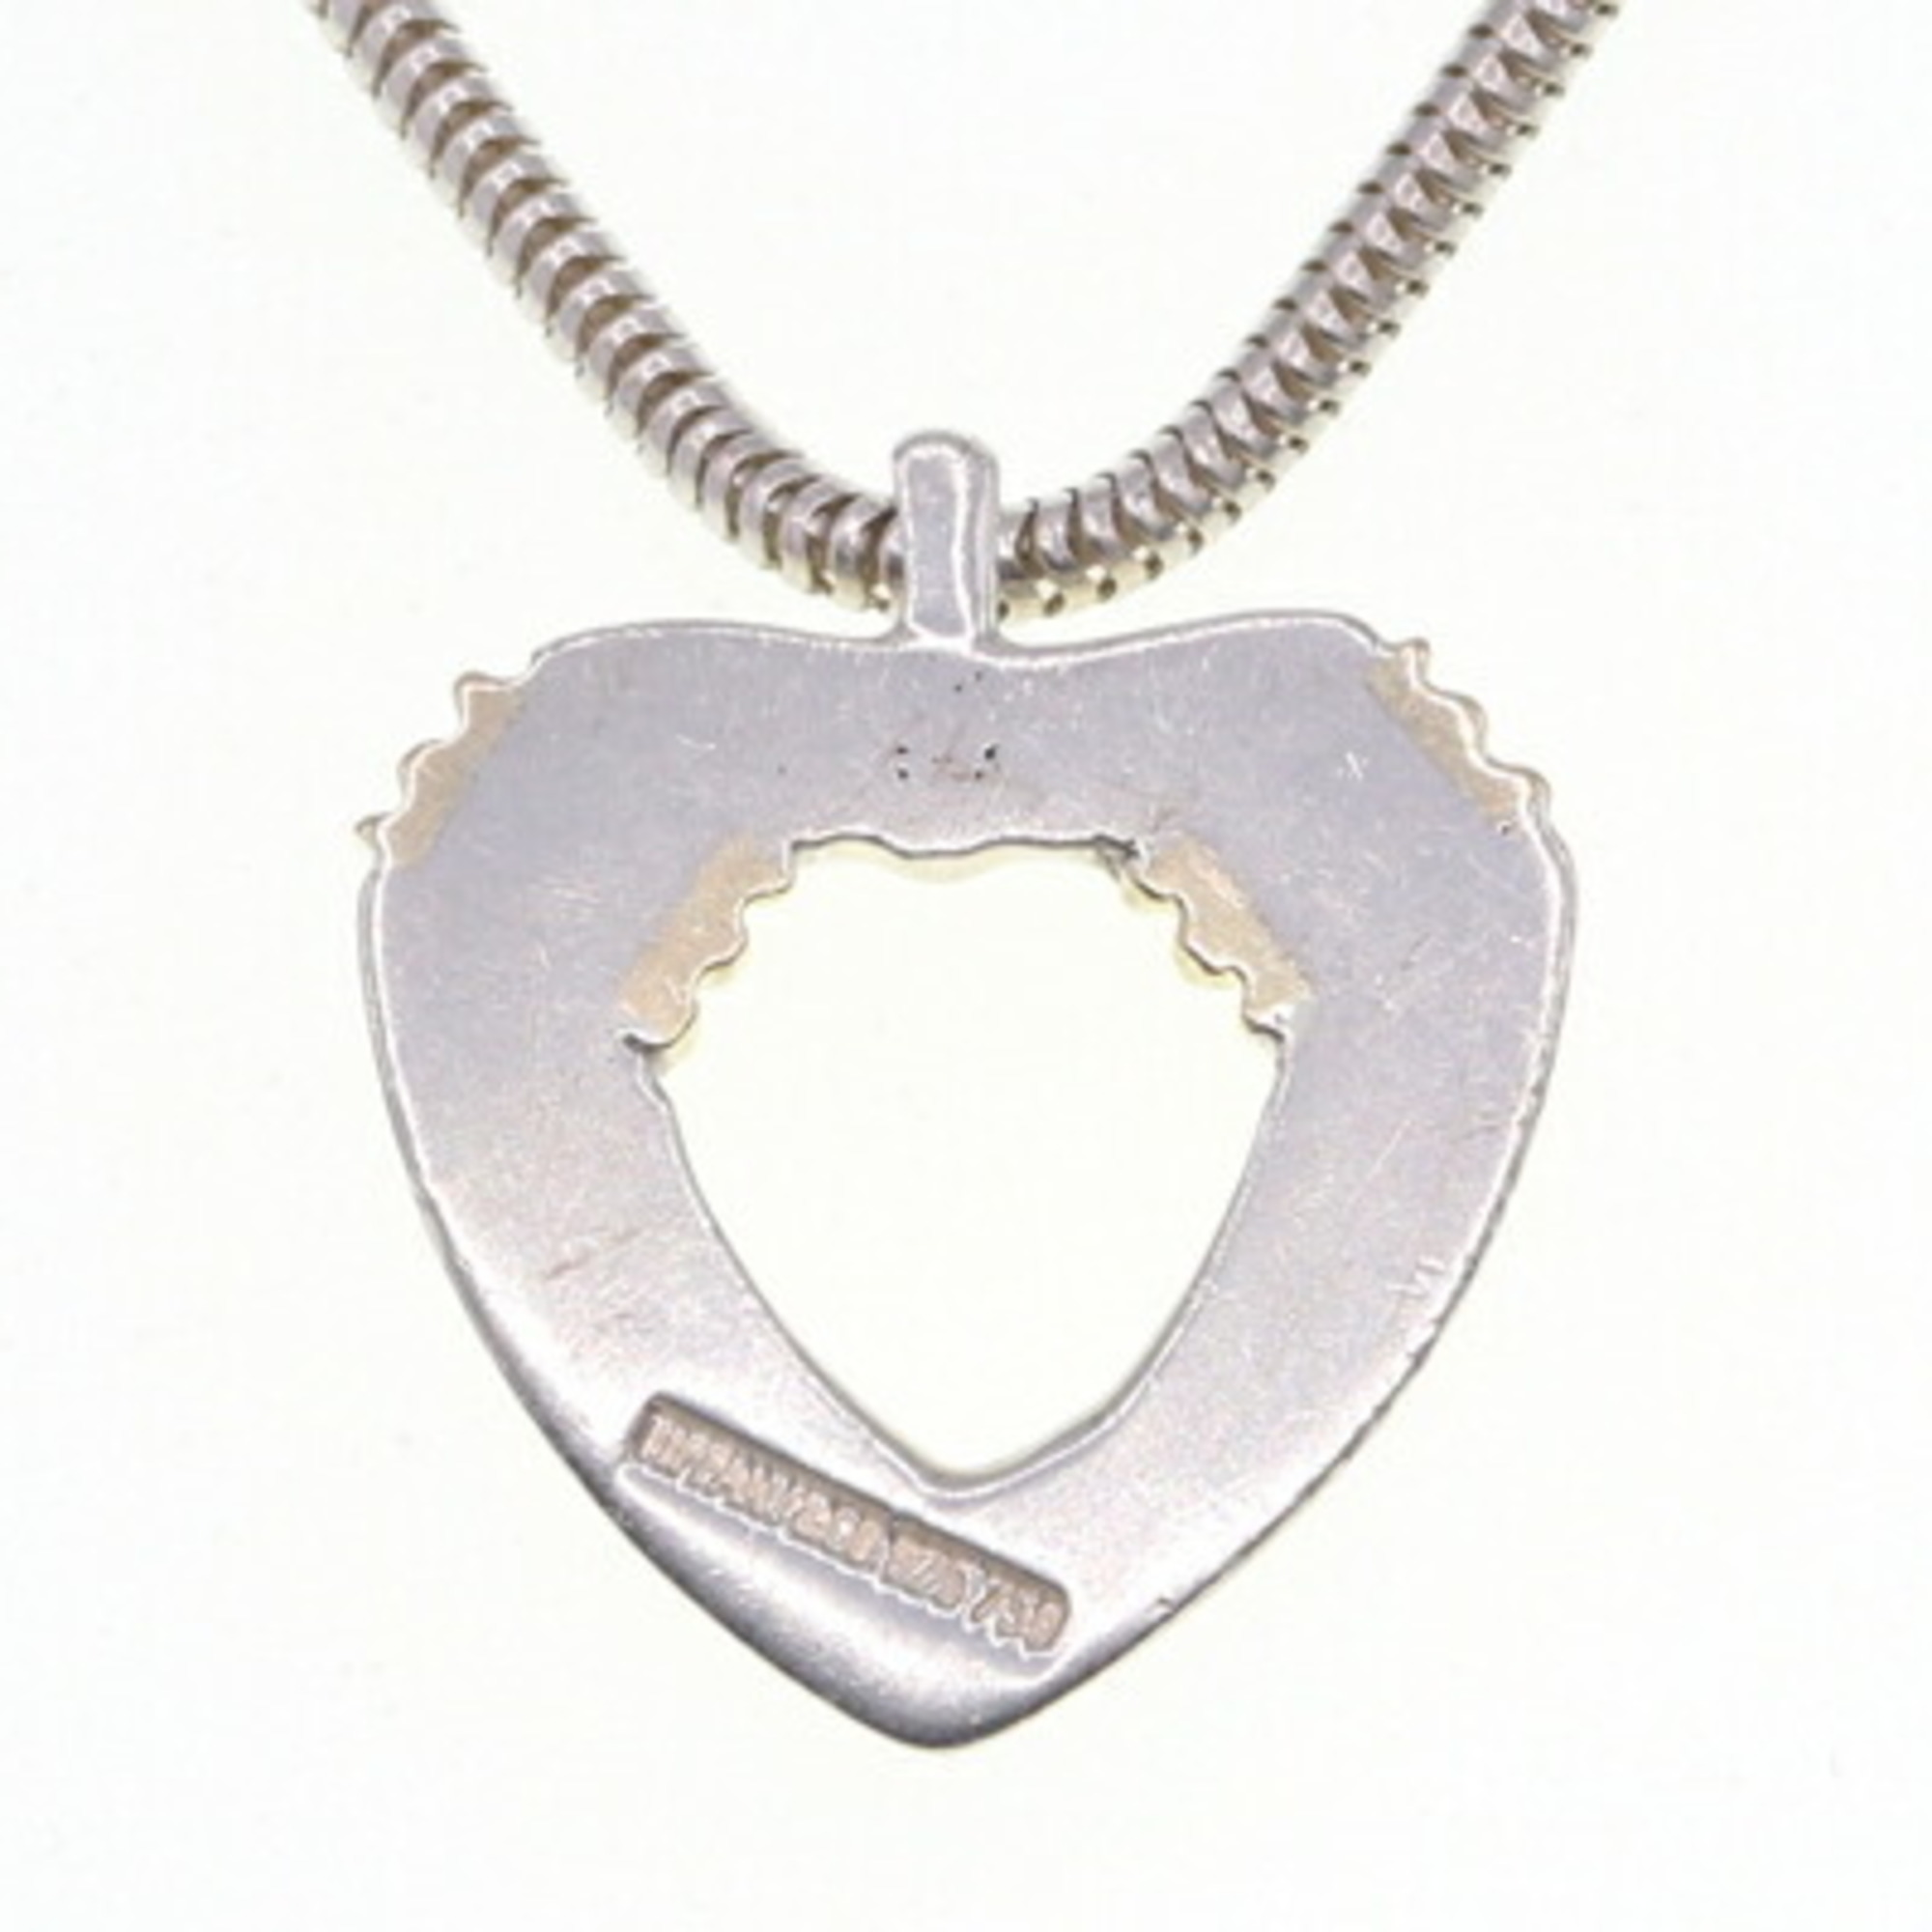 Tiffany Necklace SV Sterling Silver 925 YG Yellow Gold Heart Combination Pendant Choker Women's TIFFANY＆CO